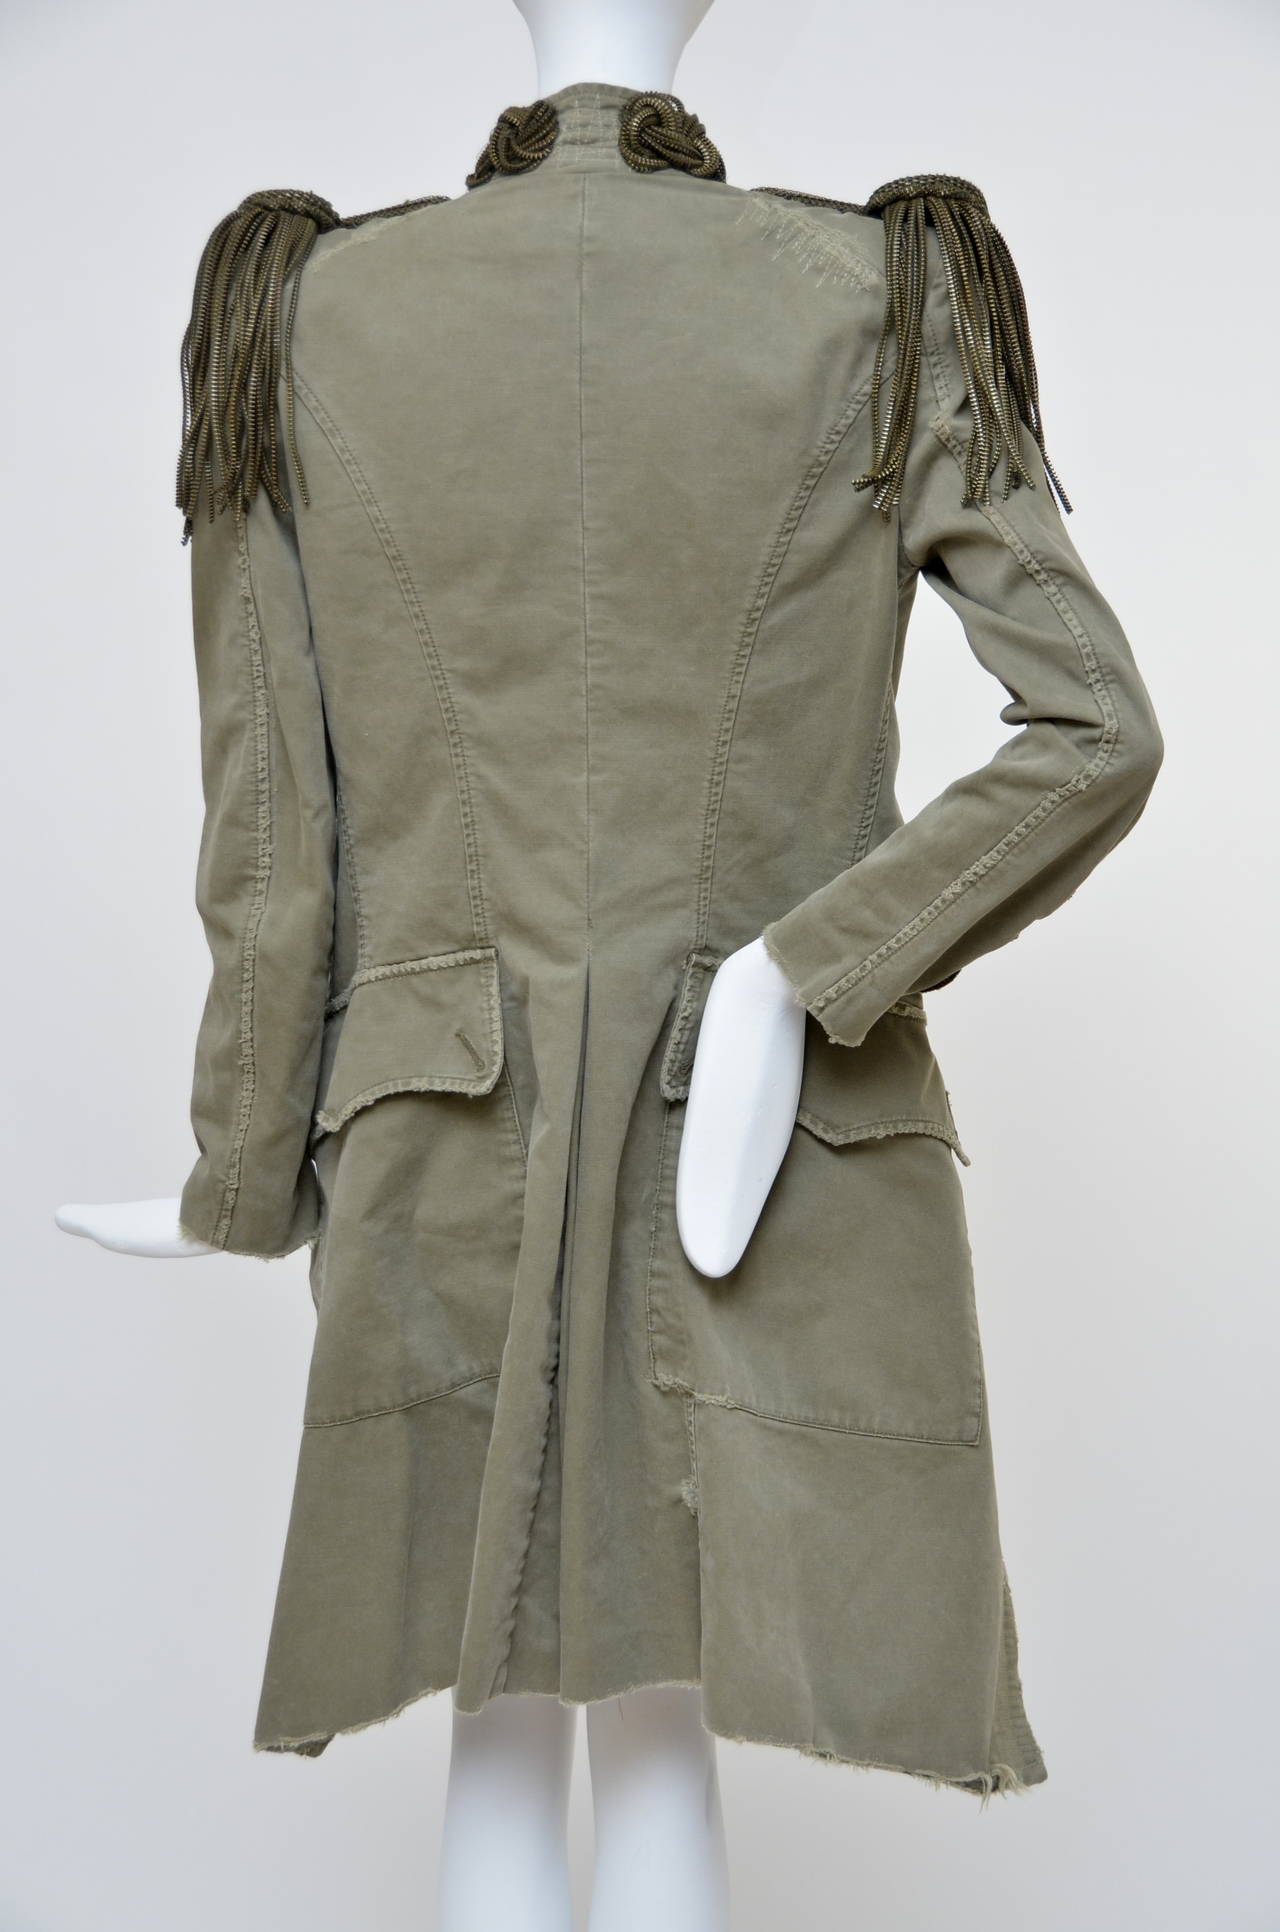 Balmain runway 2010 collection by Christophe Decarnin collection army-green cotton jacket with padded shoulders and zip-chain epaulets. Balmain jacket is collarless, has long sleeves, woven zips around the neckline and on the sleeves, a frayed trim